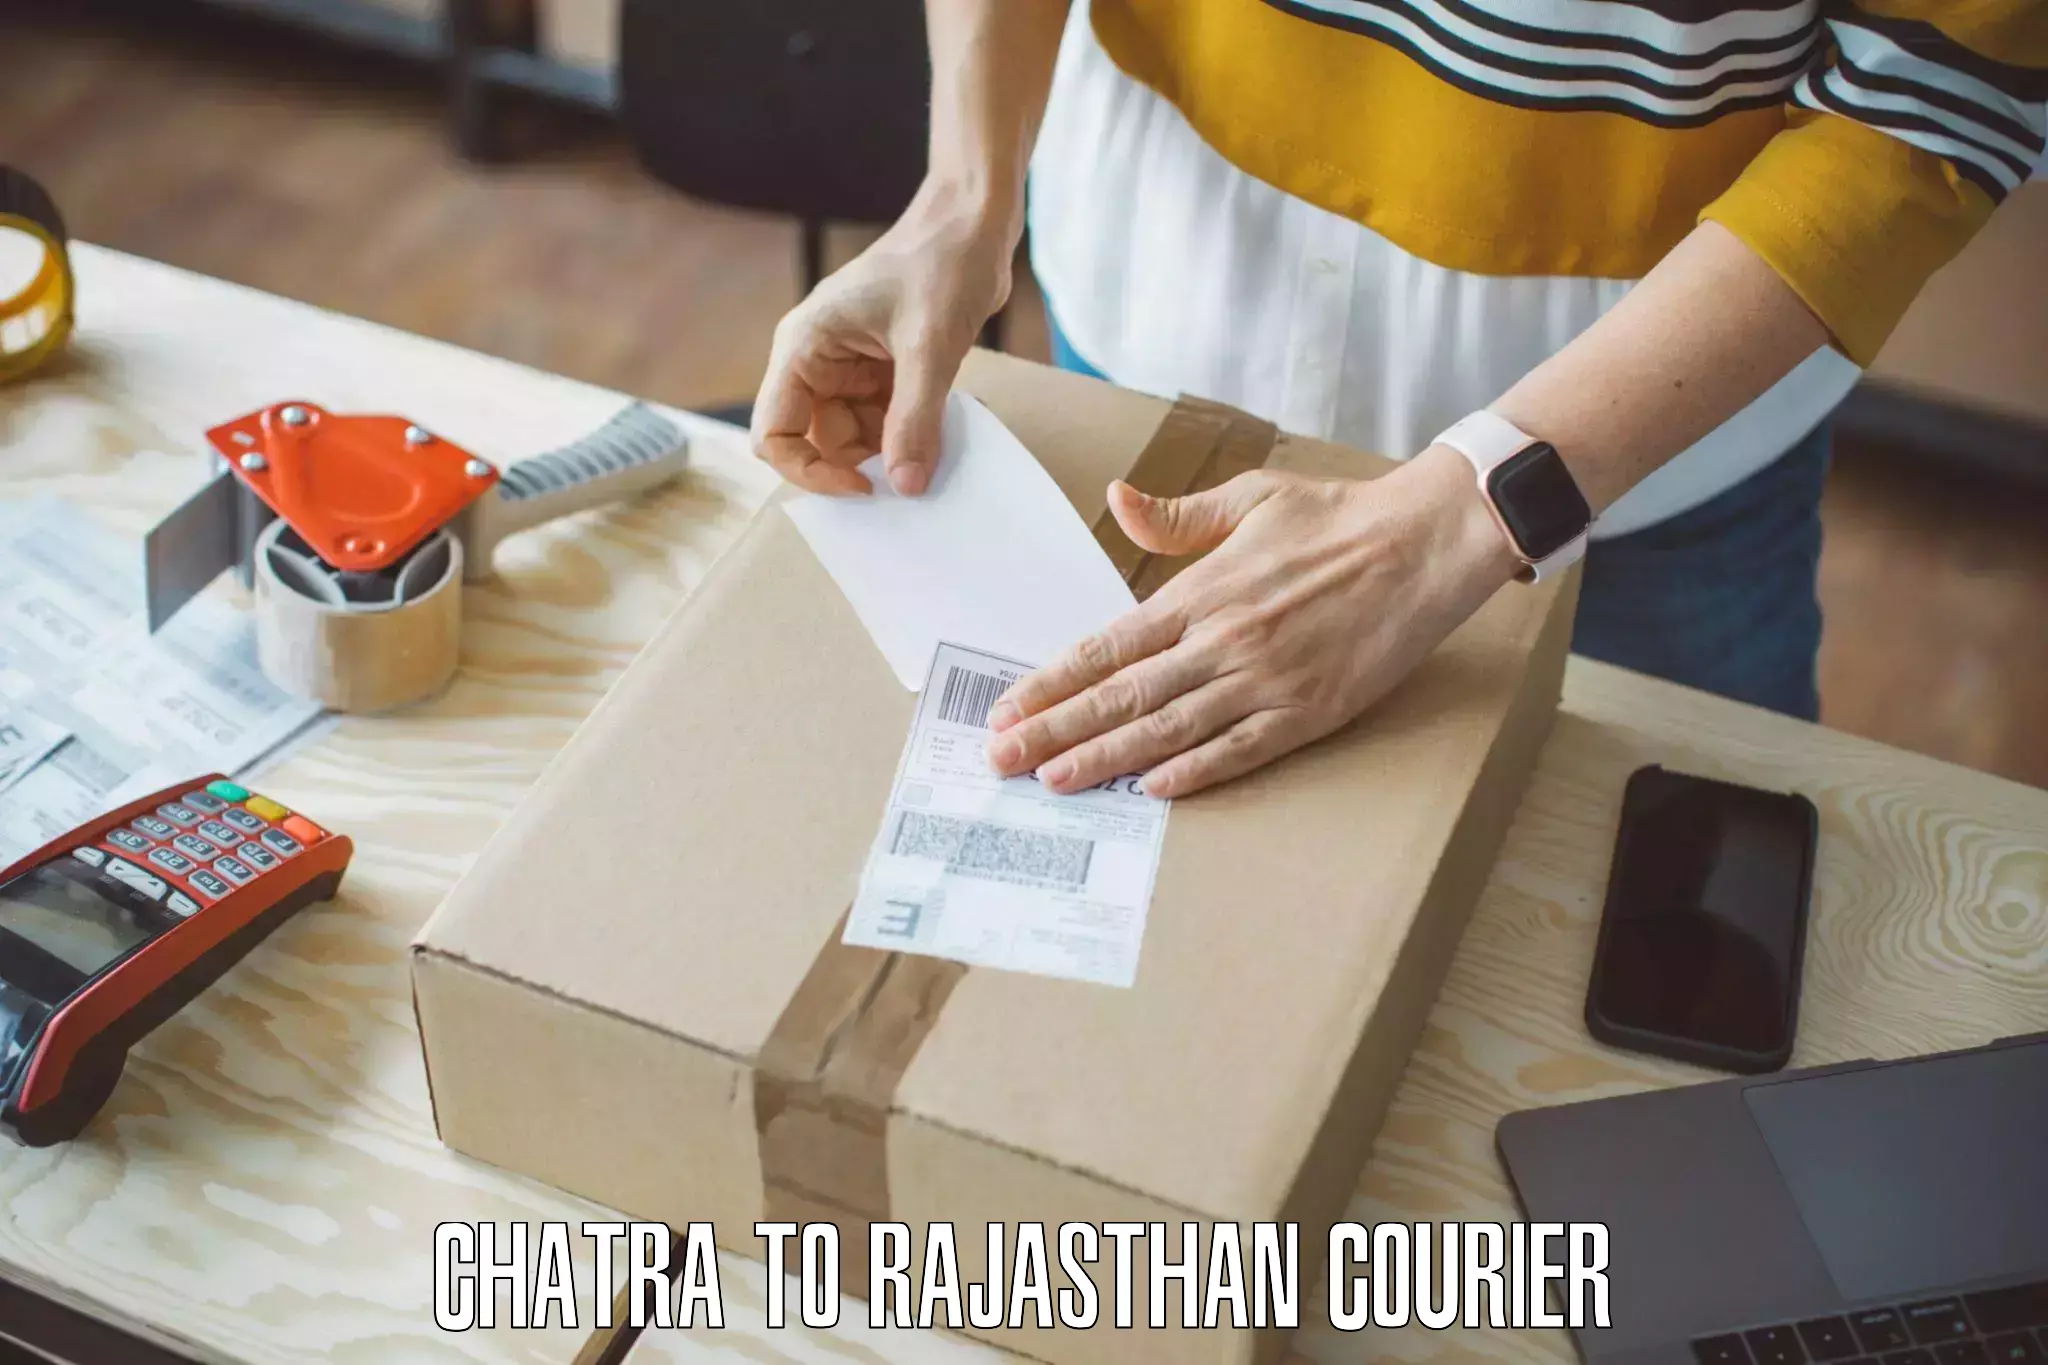 Furniture transport specialists Chatra to Yeswanthapur